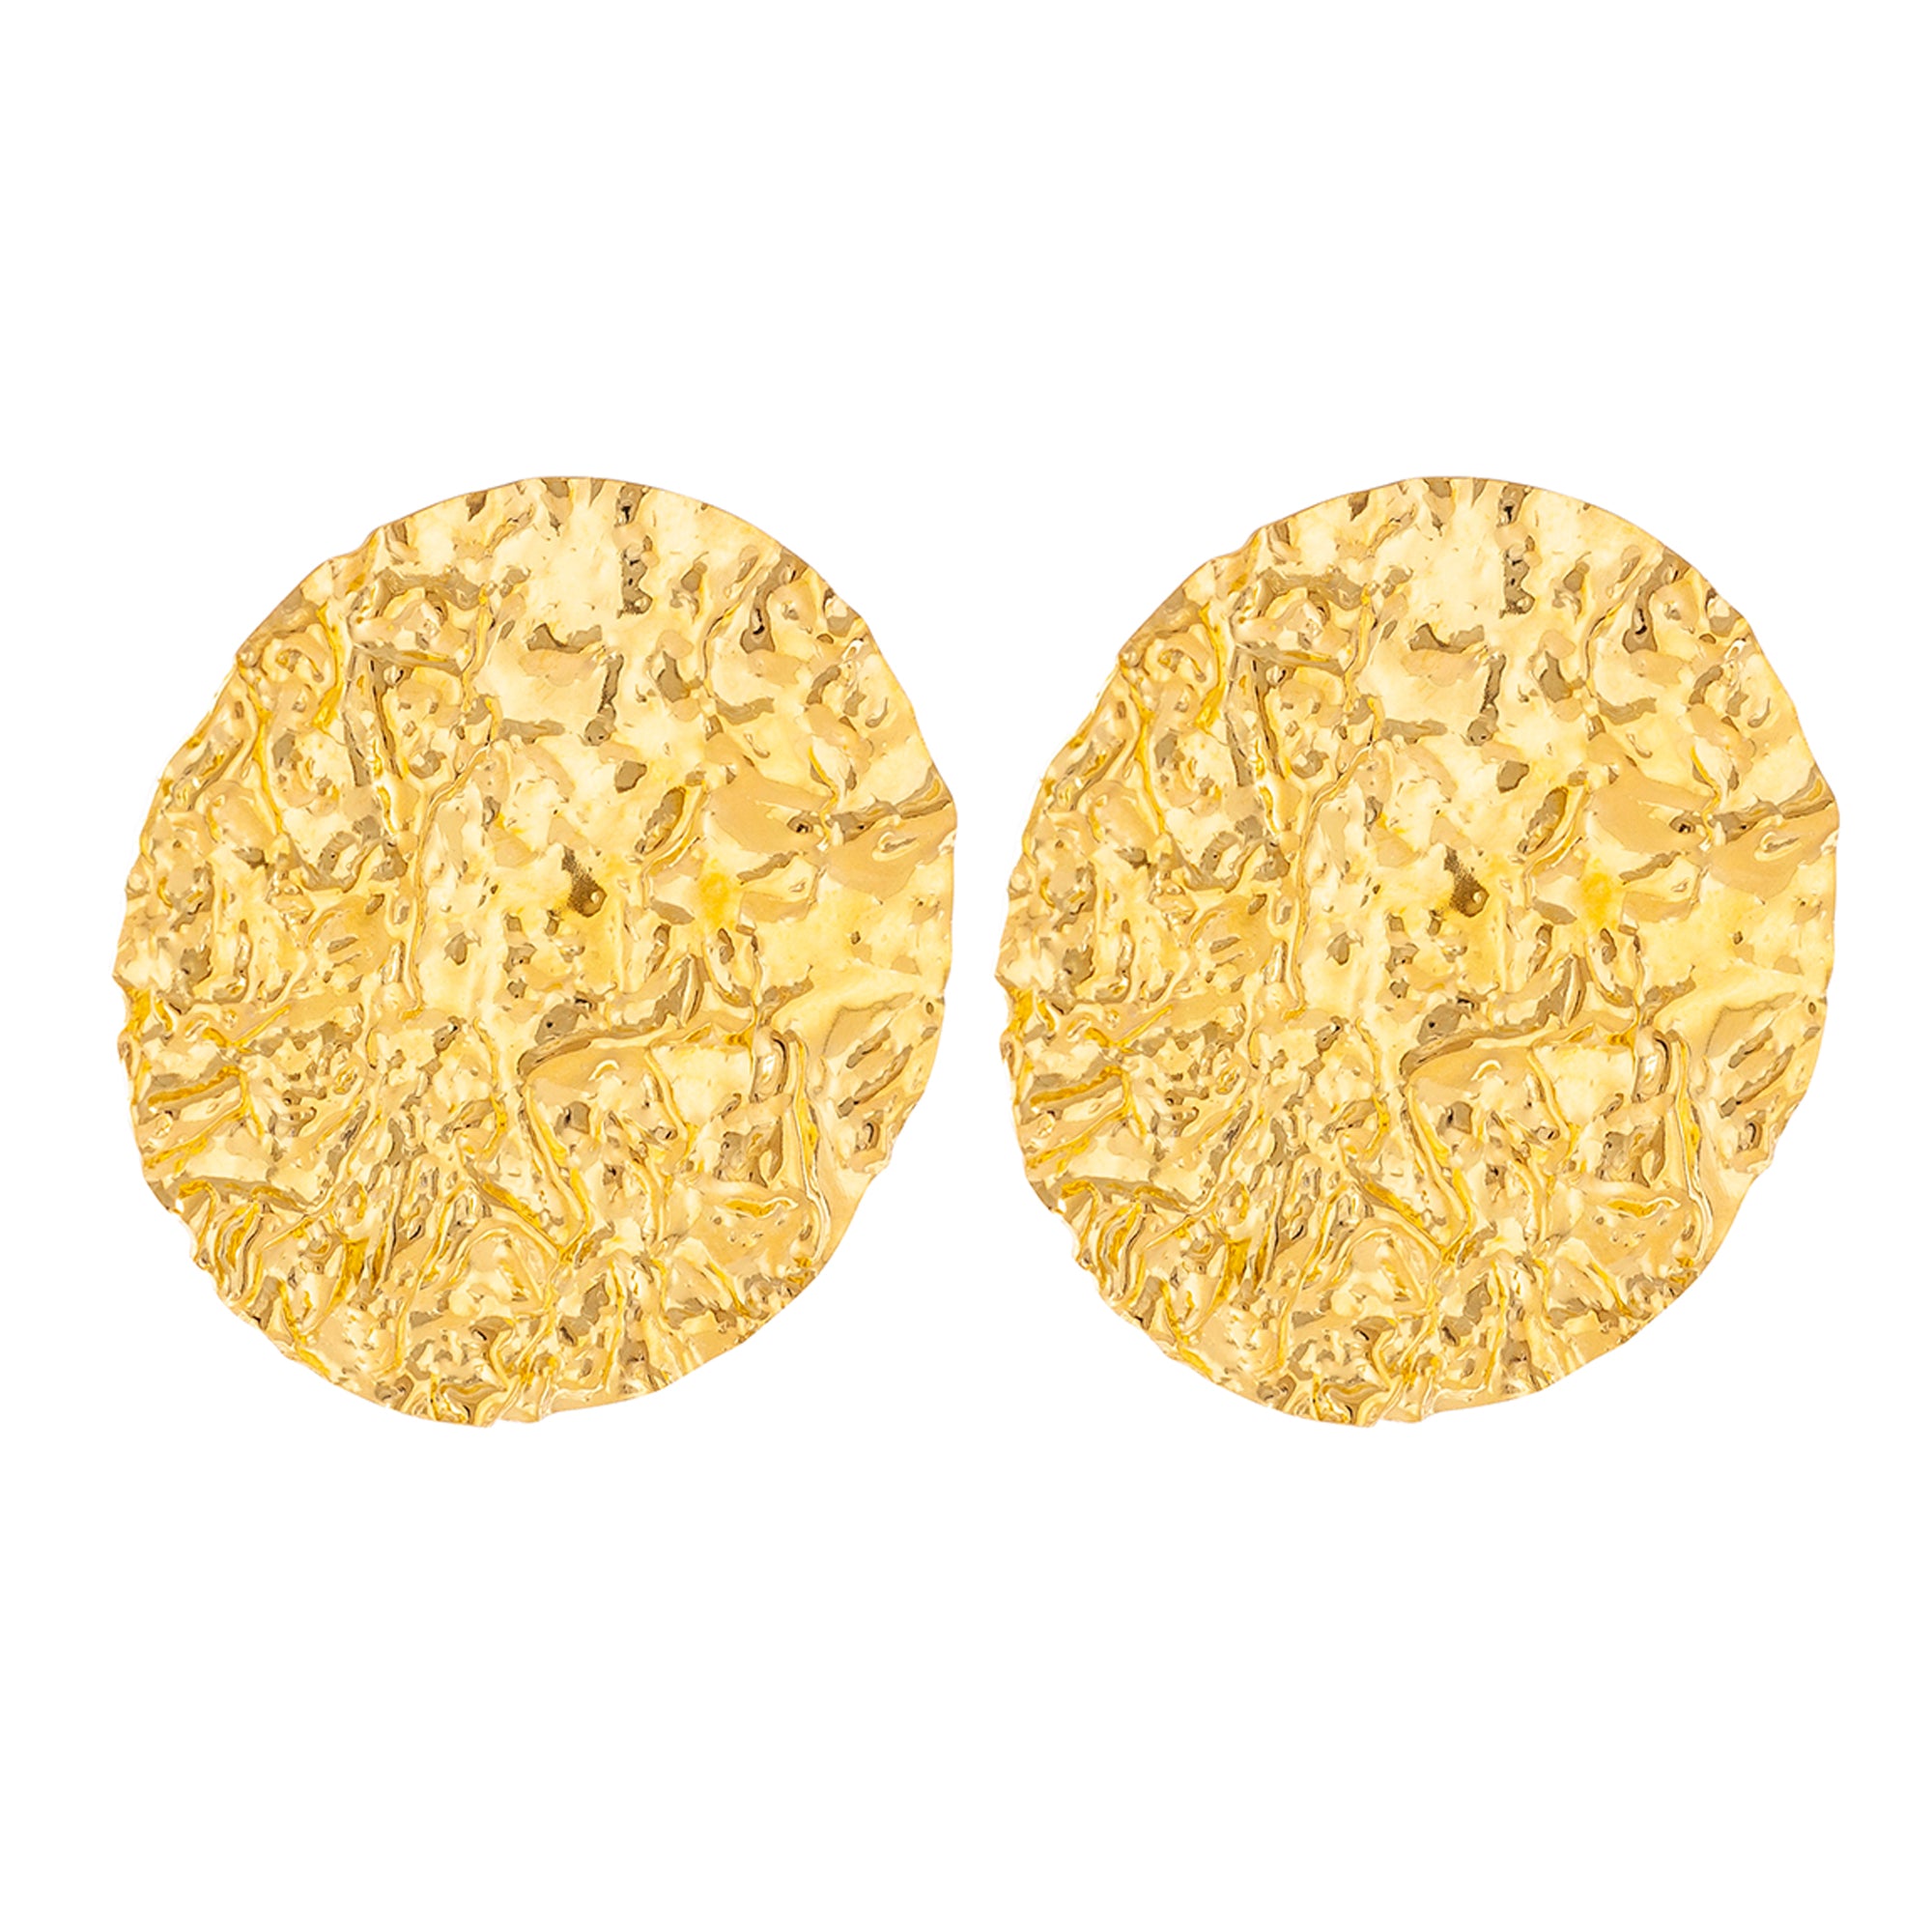 LARGE GOLD HAMMERED DISC EARRINGS